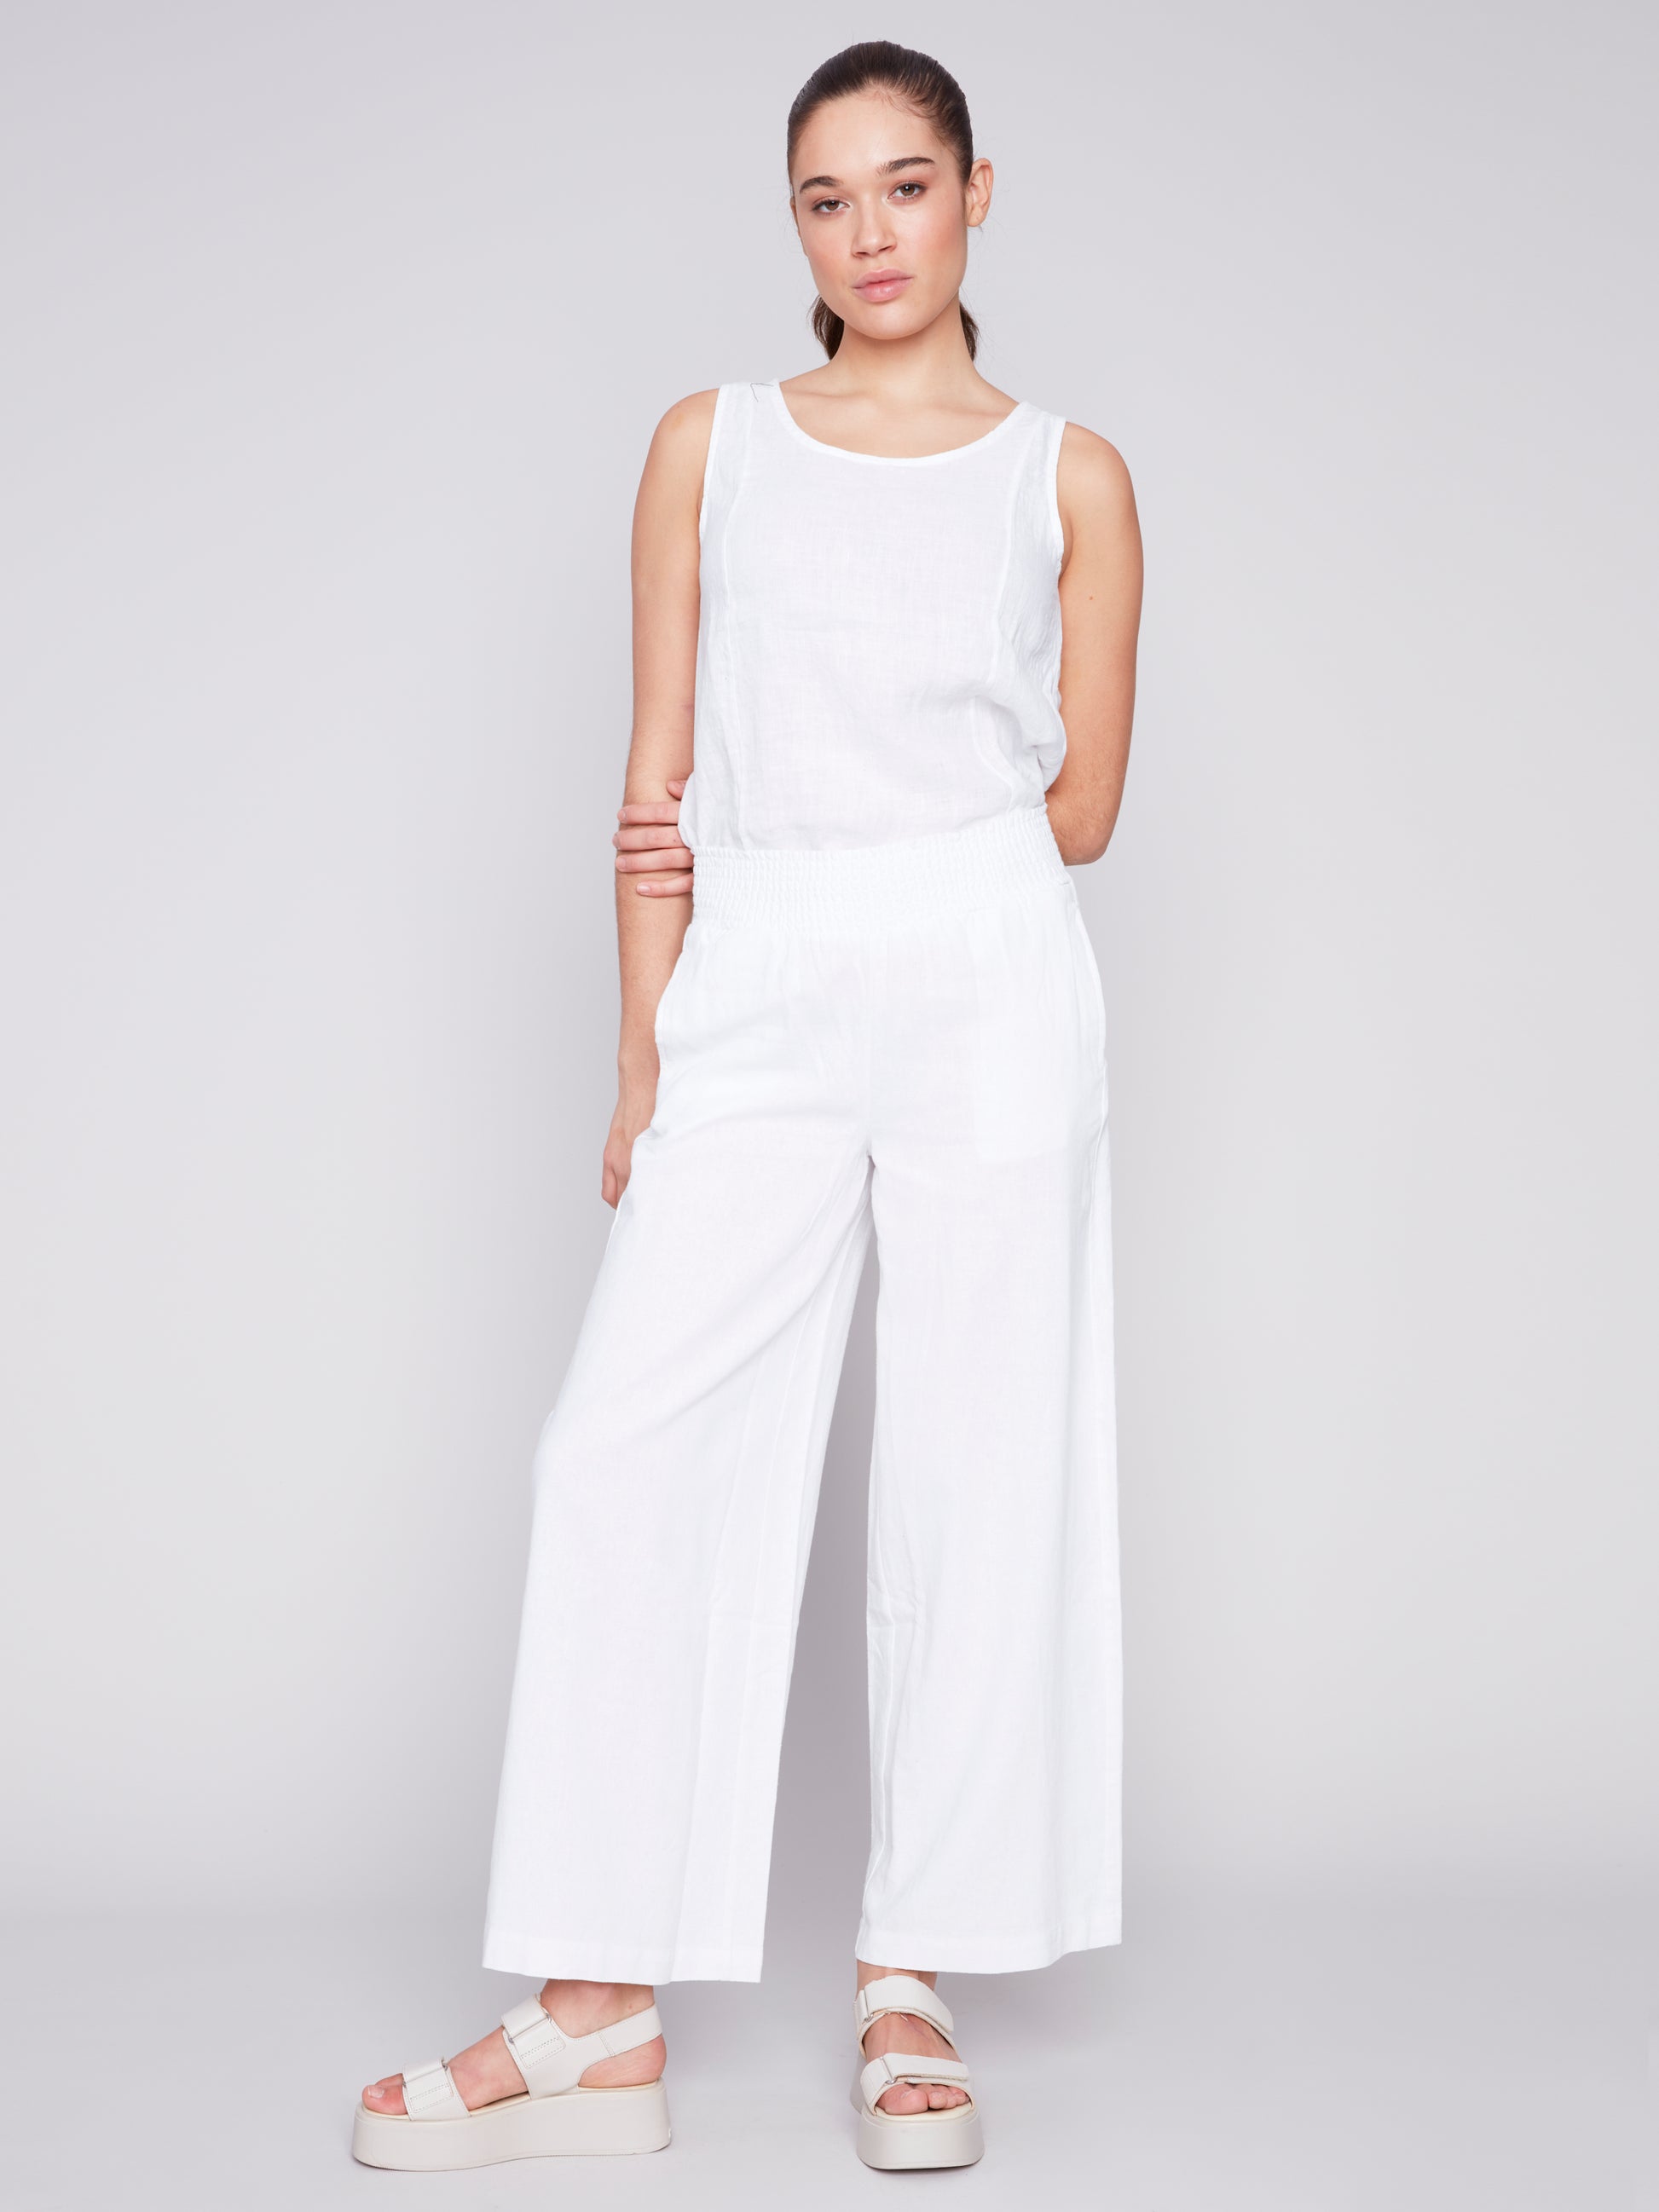 A fashion-forward woman elegantly donning Charlie B's Wide Leg Pull On Pant with Elastic Waist and sandals.